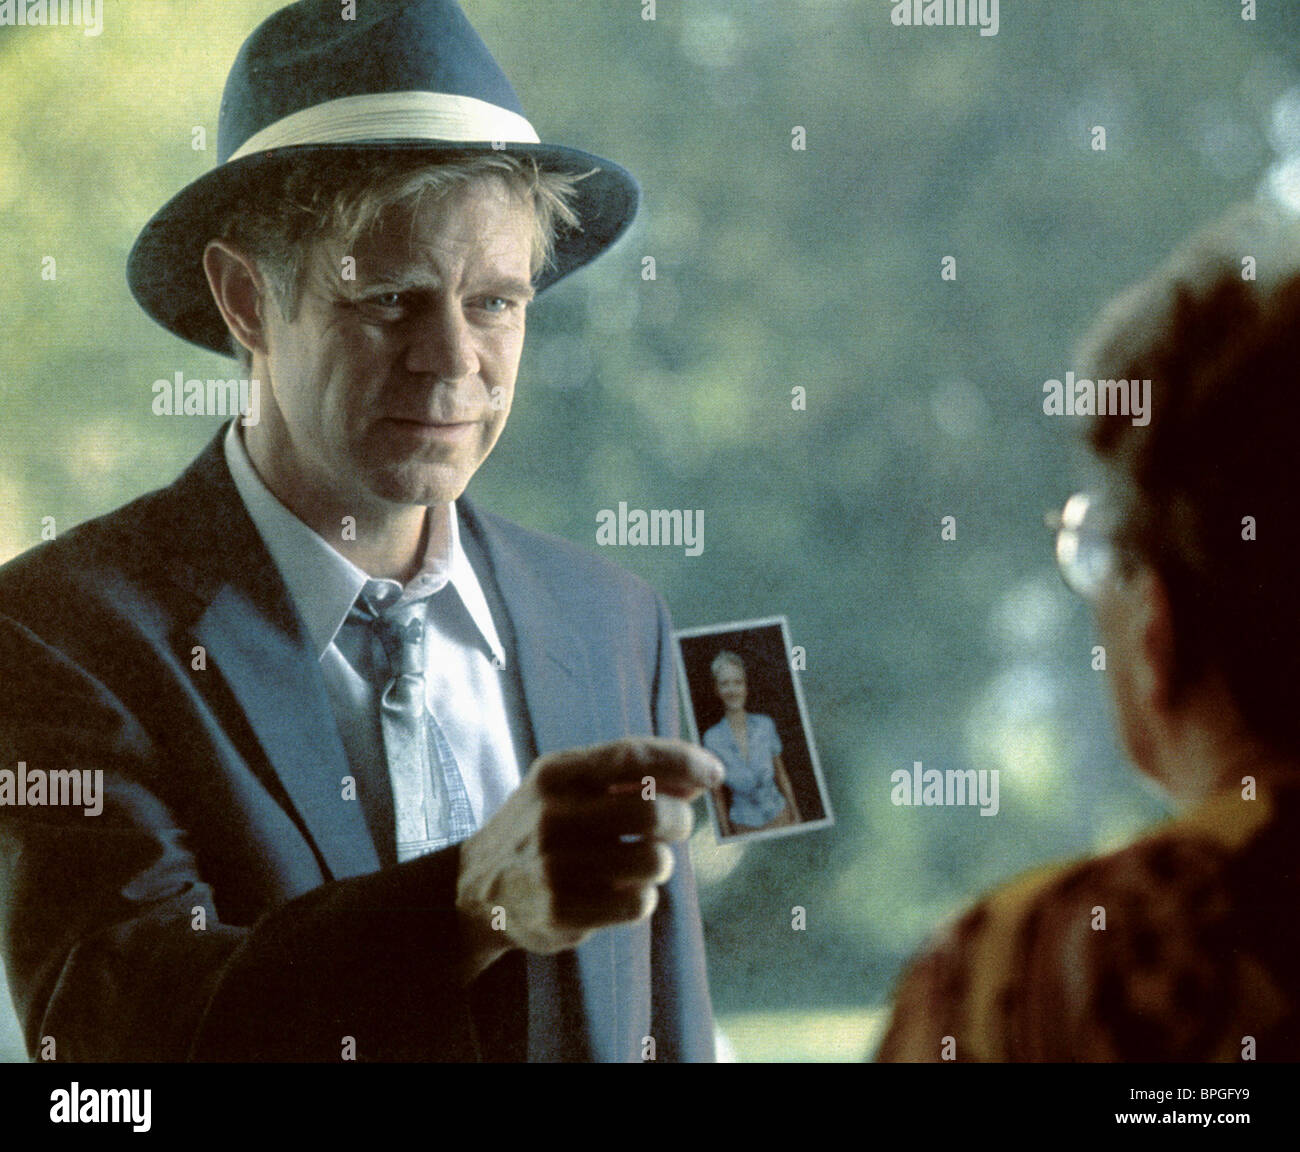 William H Macy 1998 High Resolution Stock Photography and Images - Alamy